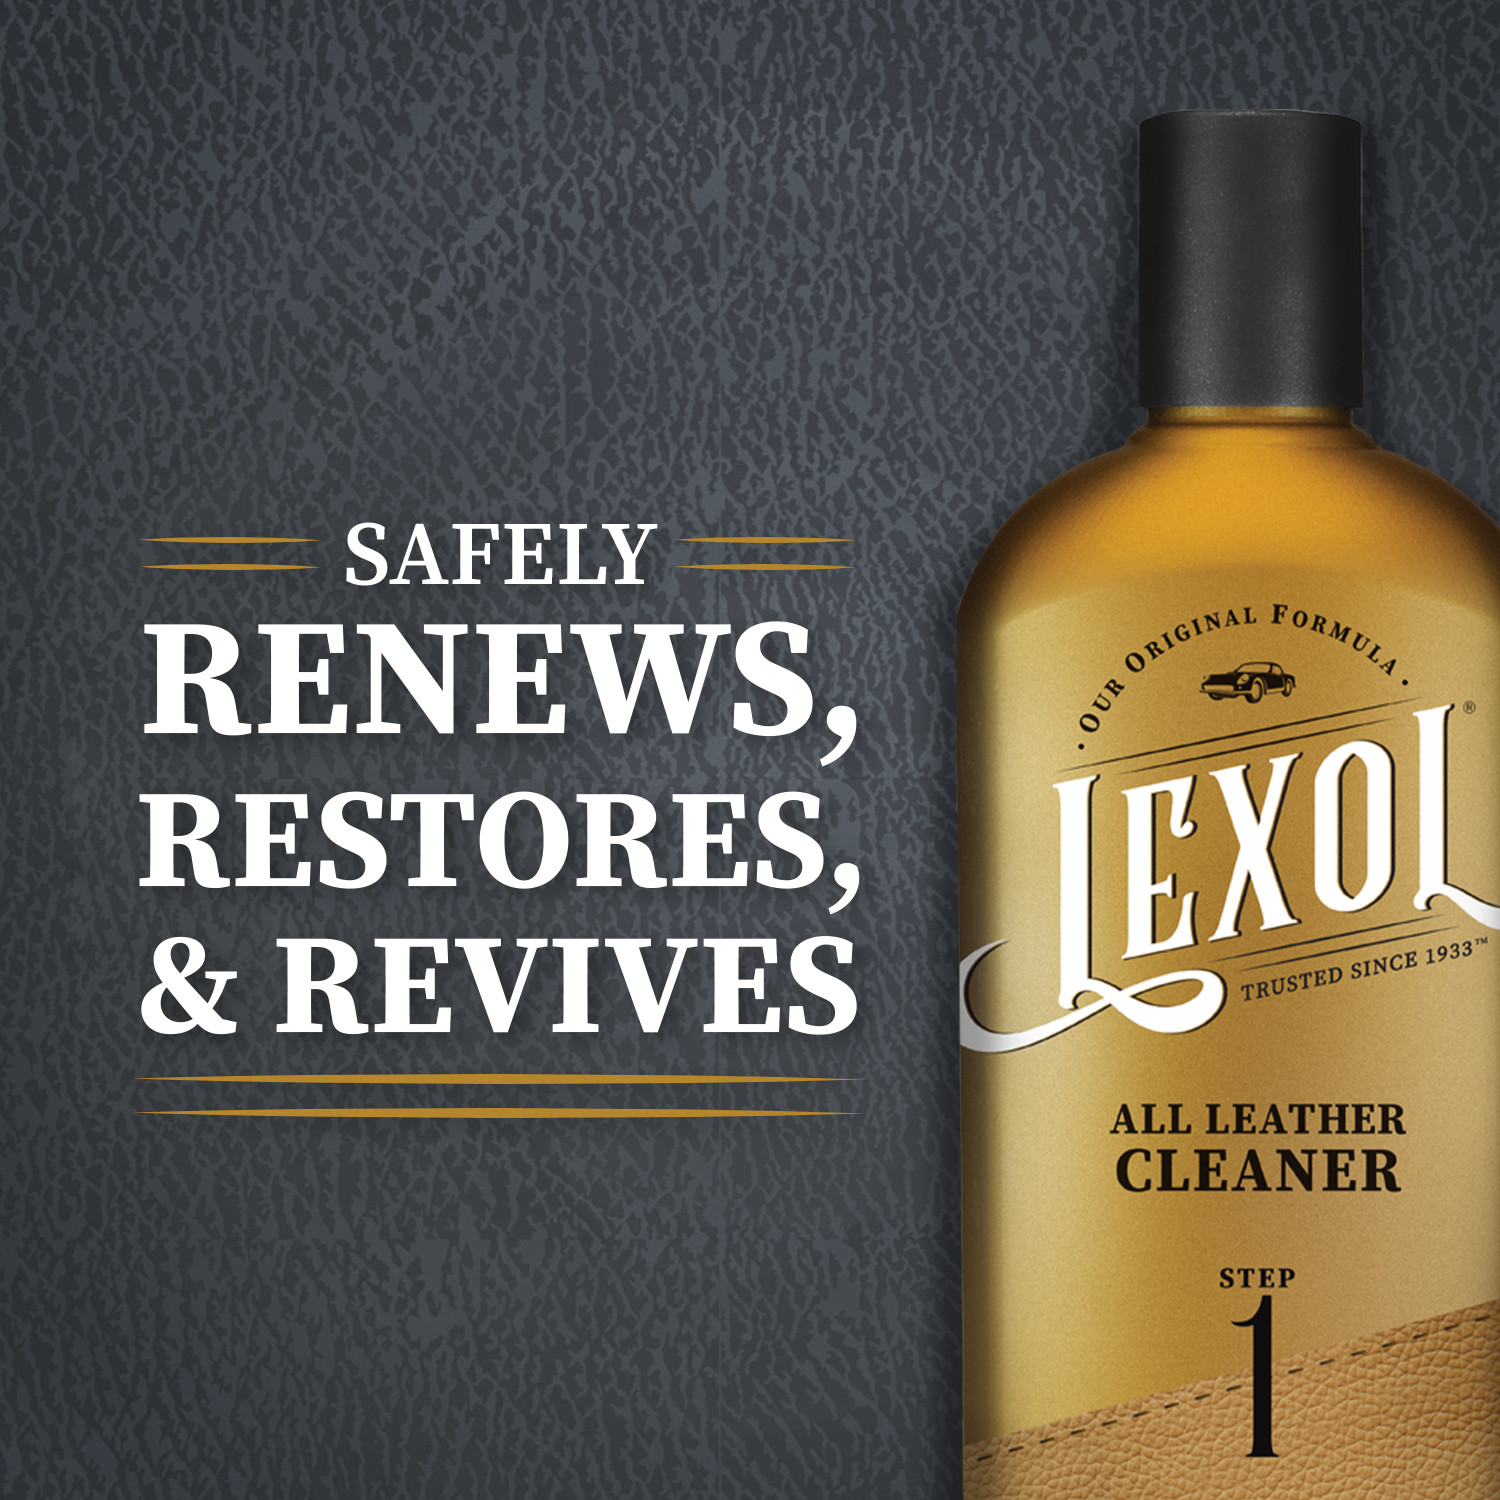 Lexol All Leather Deep Leather Cleaner, bottle - 16.9 OZ - image 2 of 9